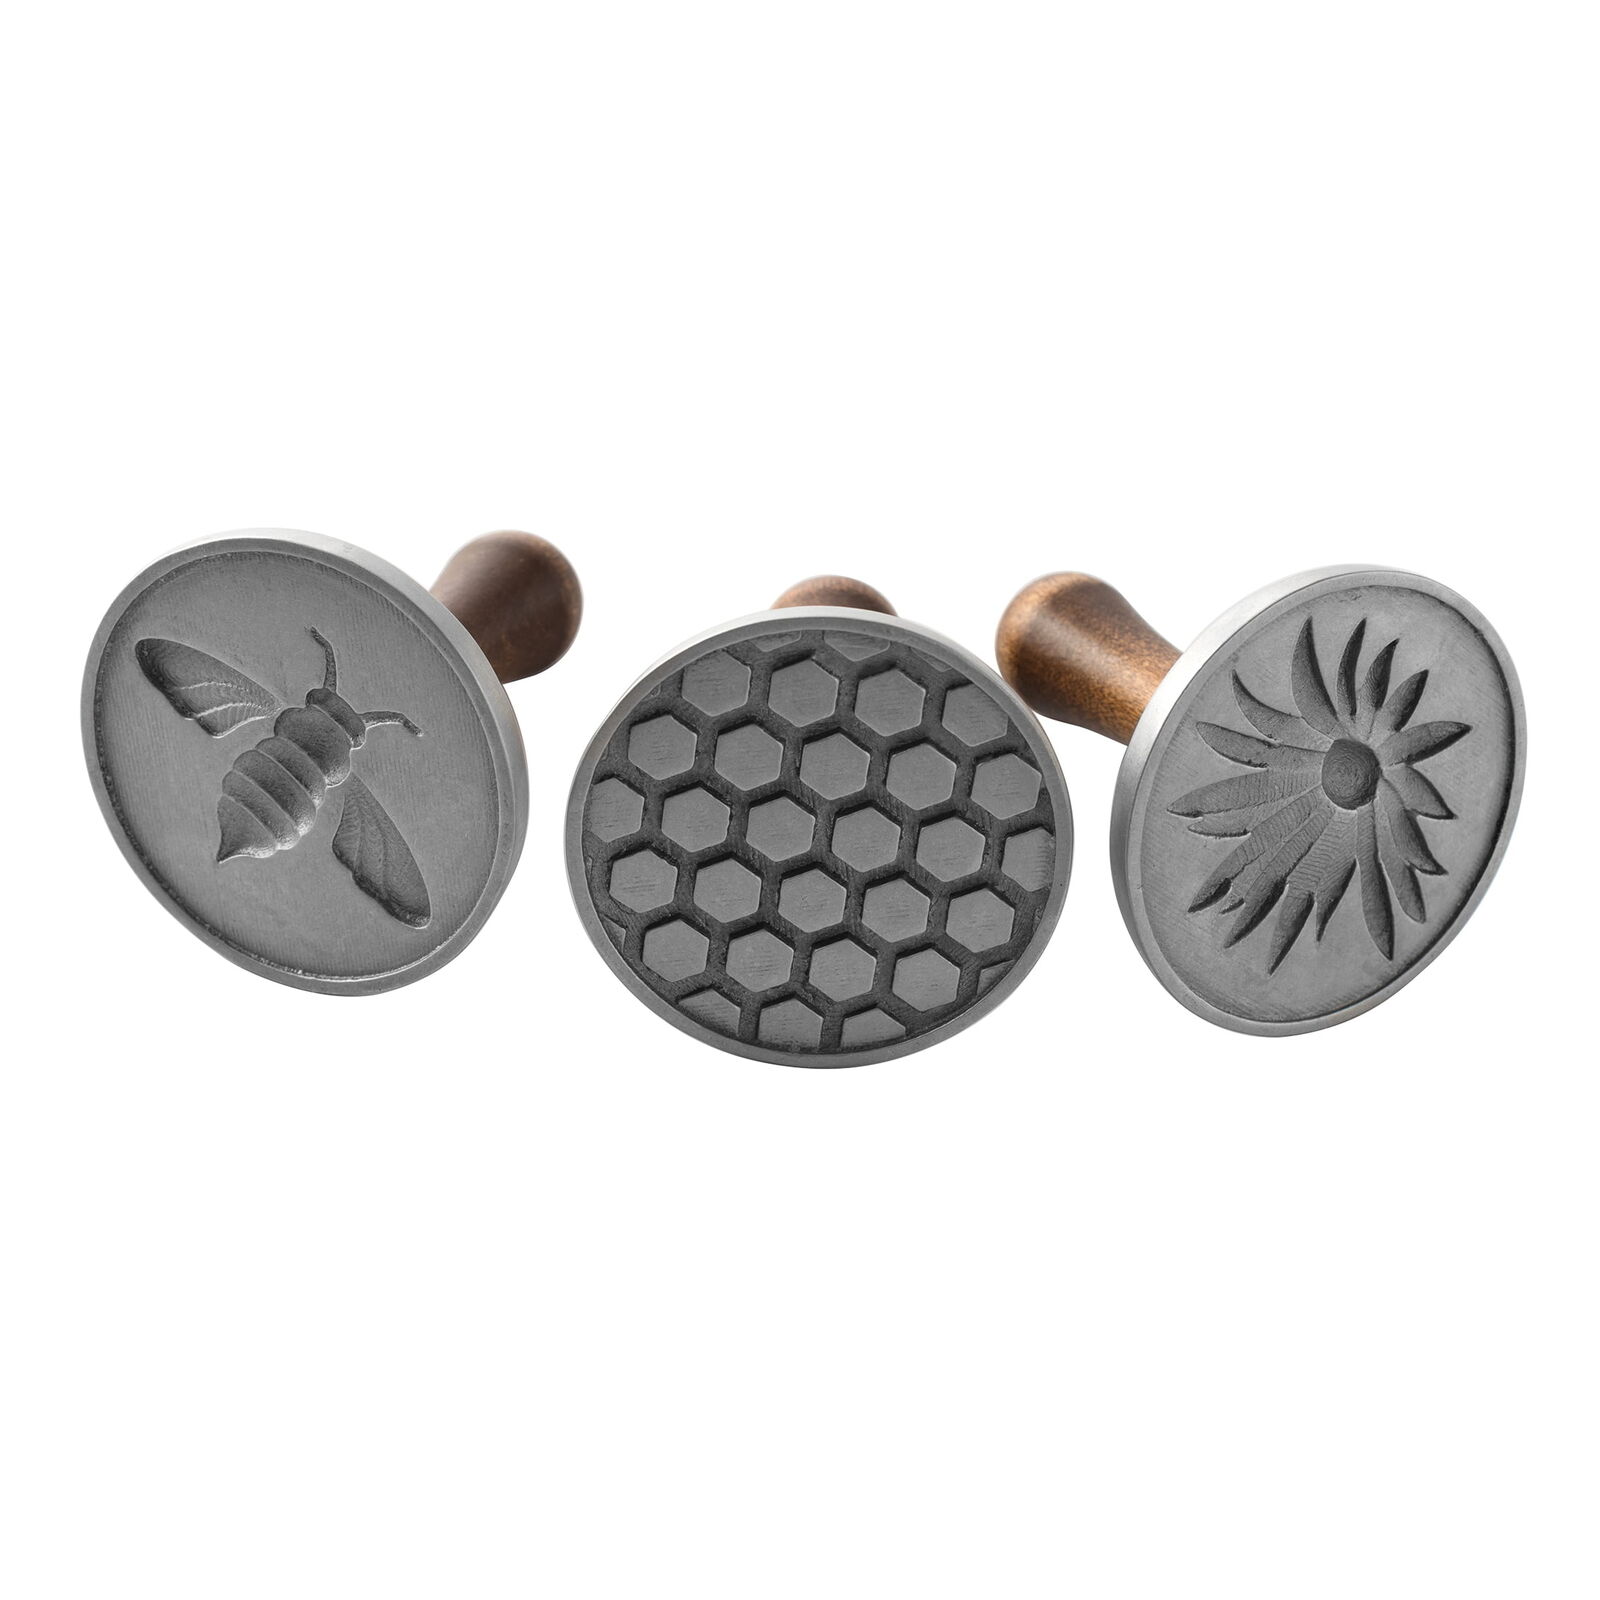 Nordic Ware Honey Bees Cookie Stamps, Cast Aluminum With Wood Handles